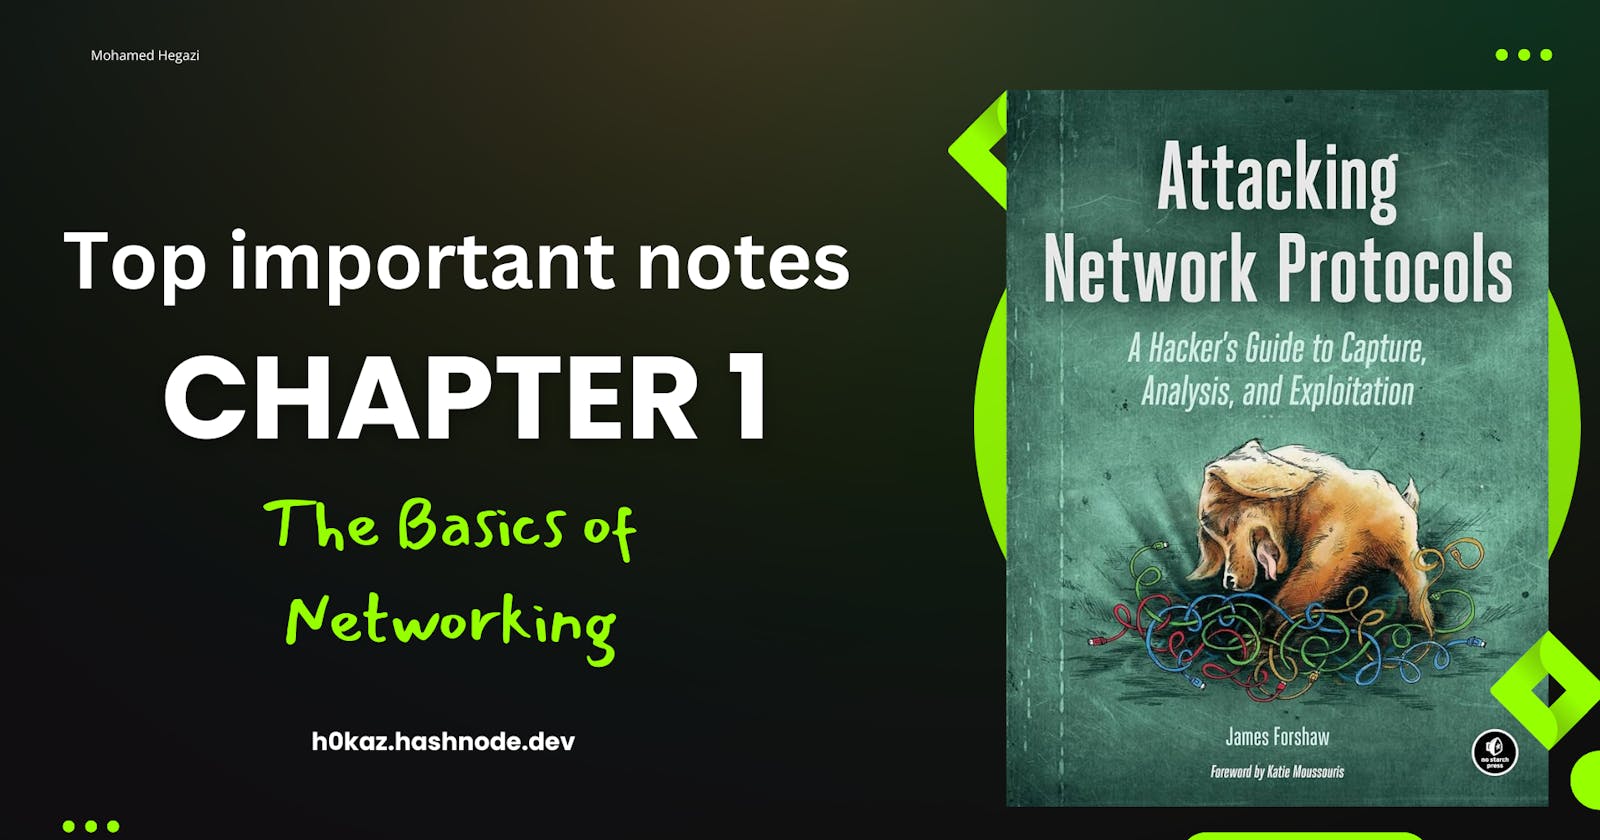 Chapter 1: The Basics of Networking